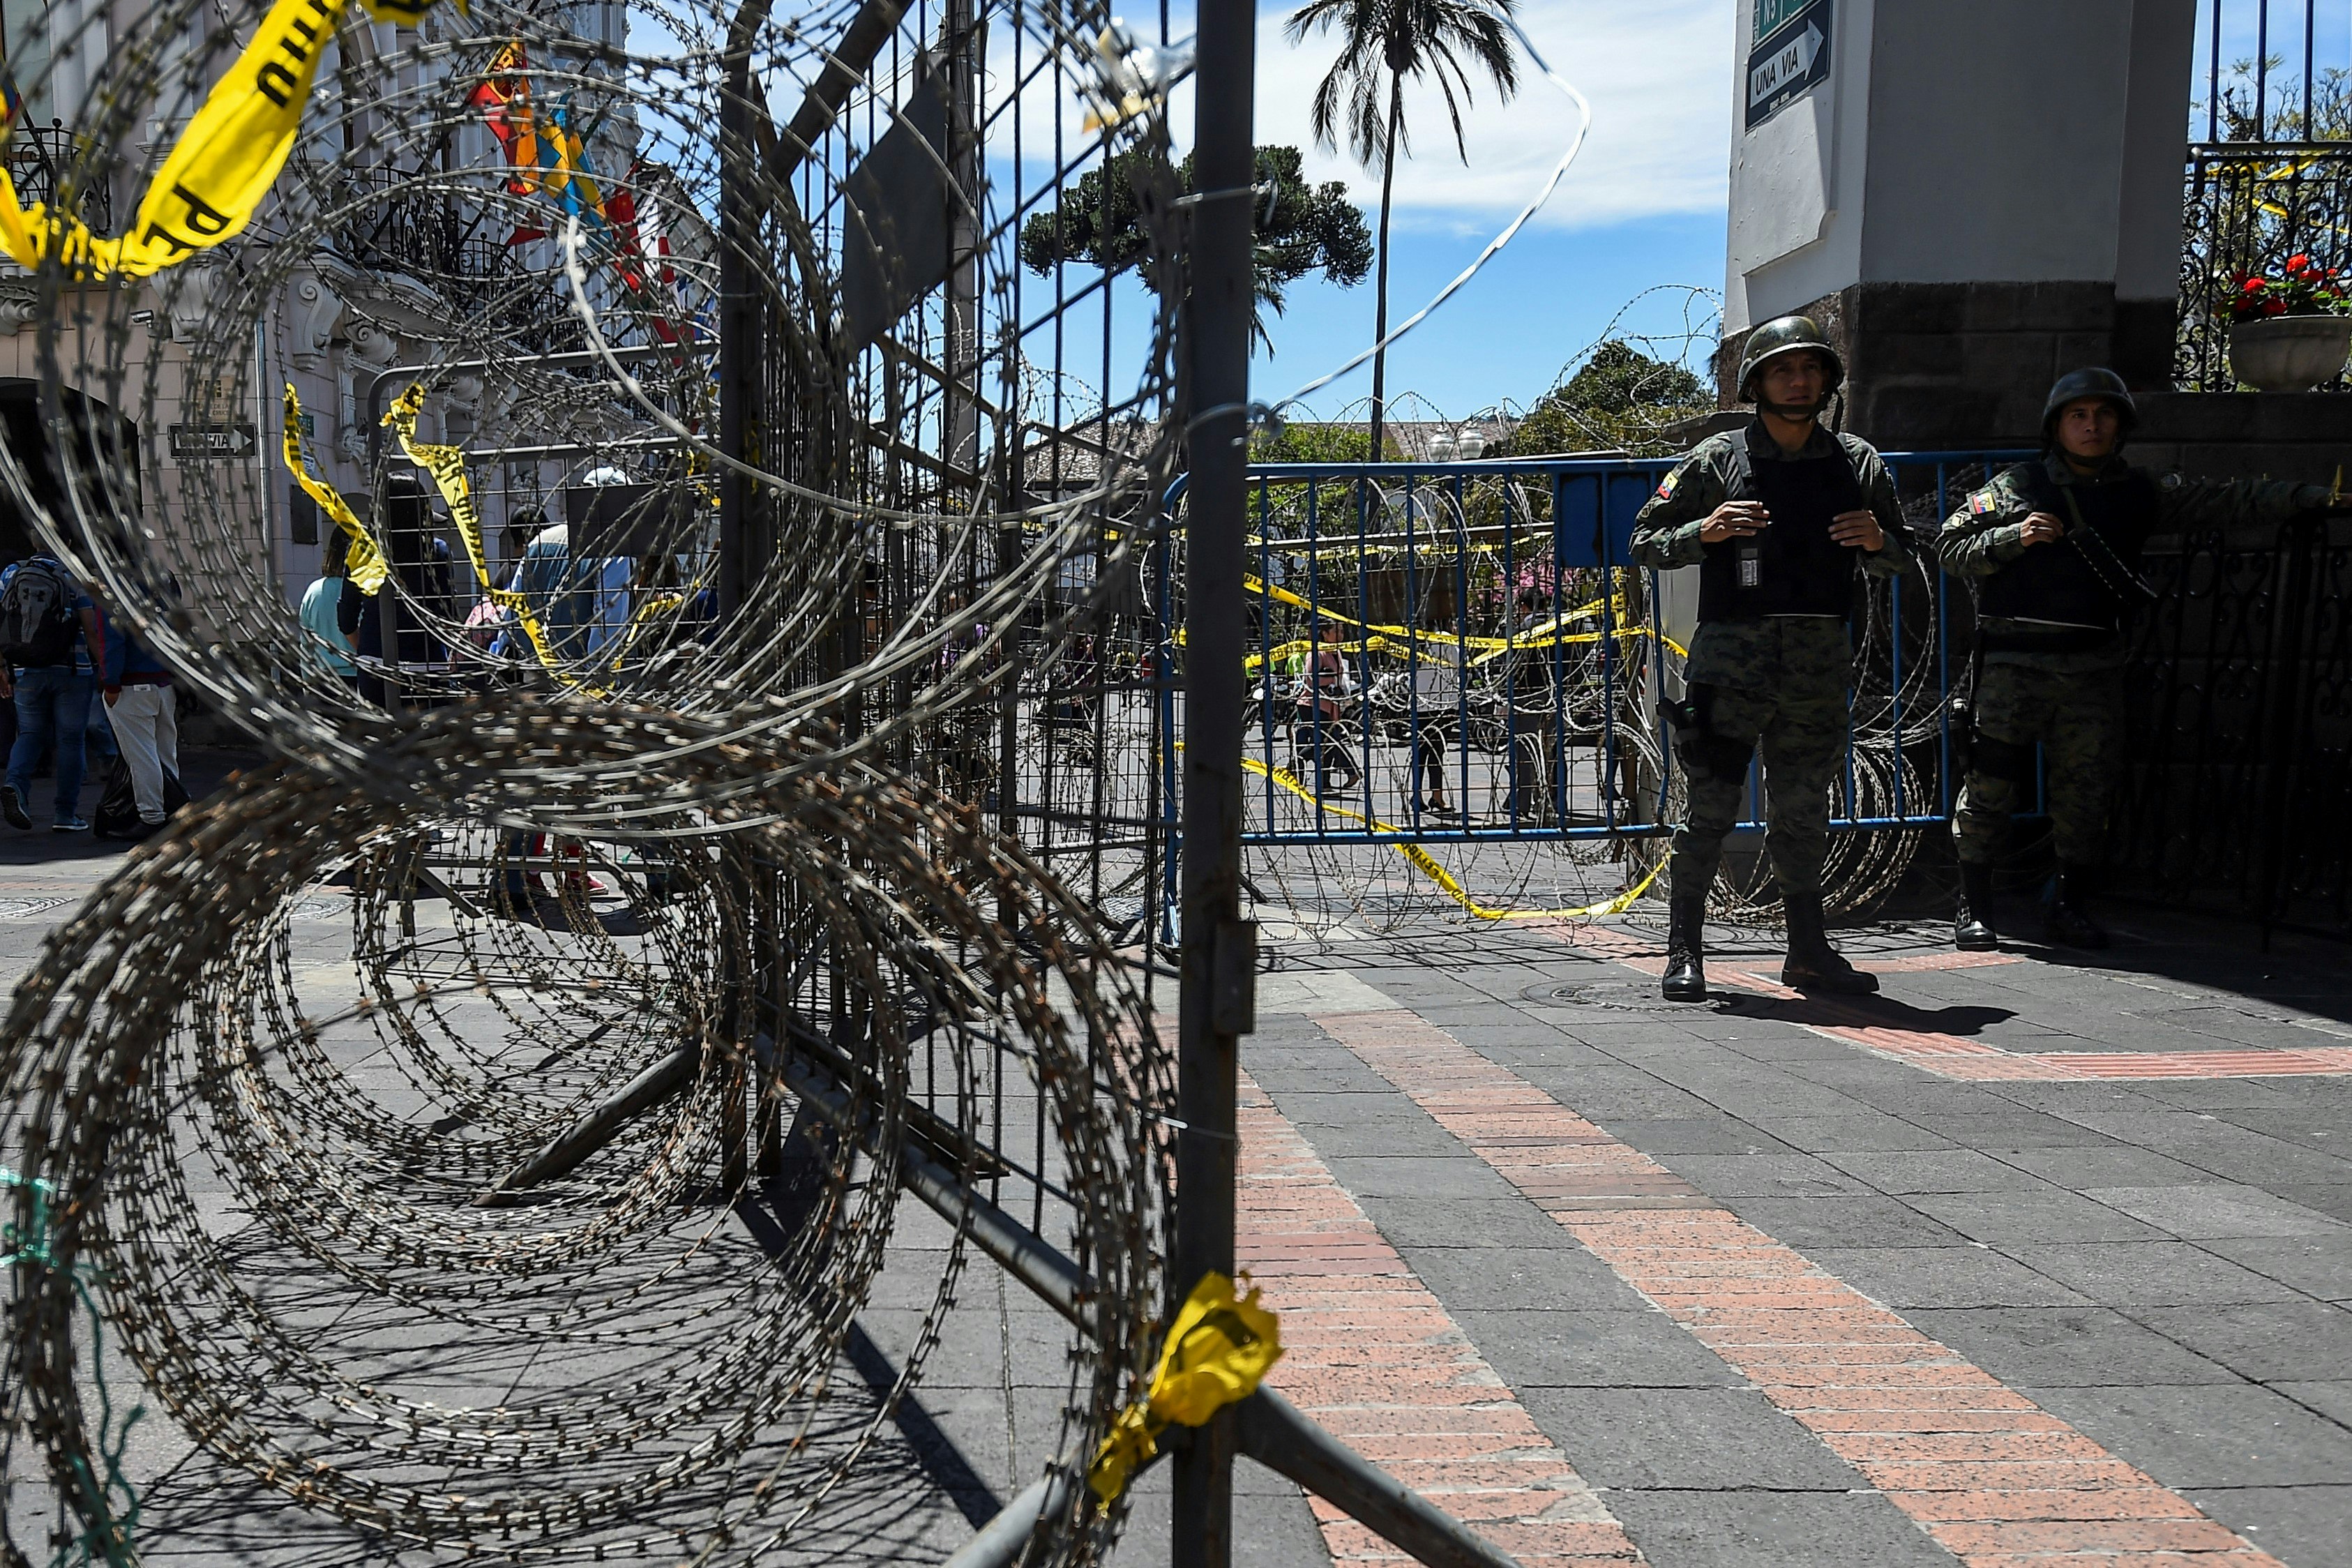 Rings of barbed wire next to men in military fatigues